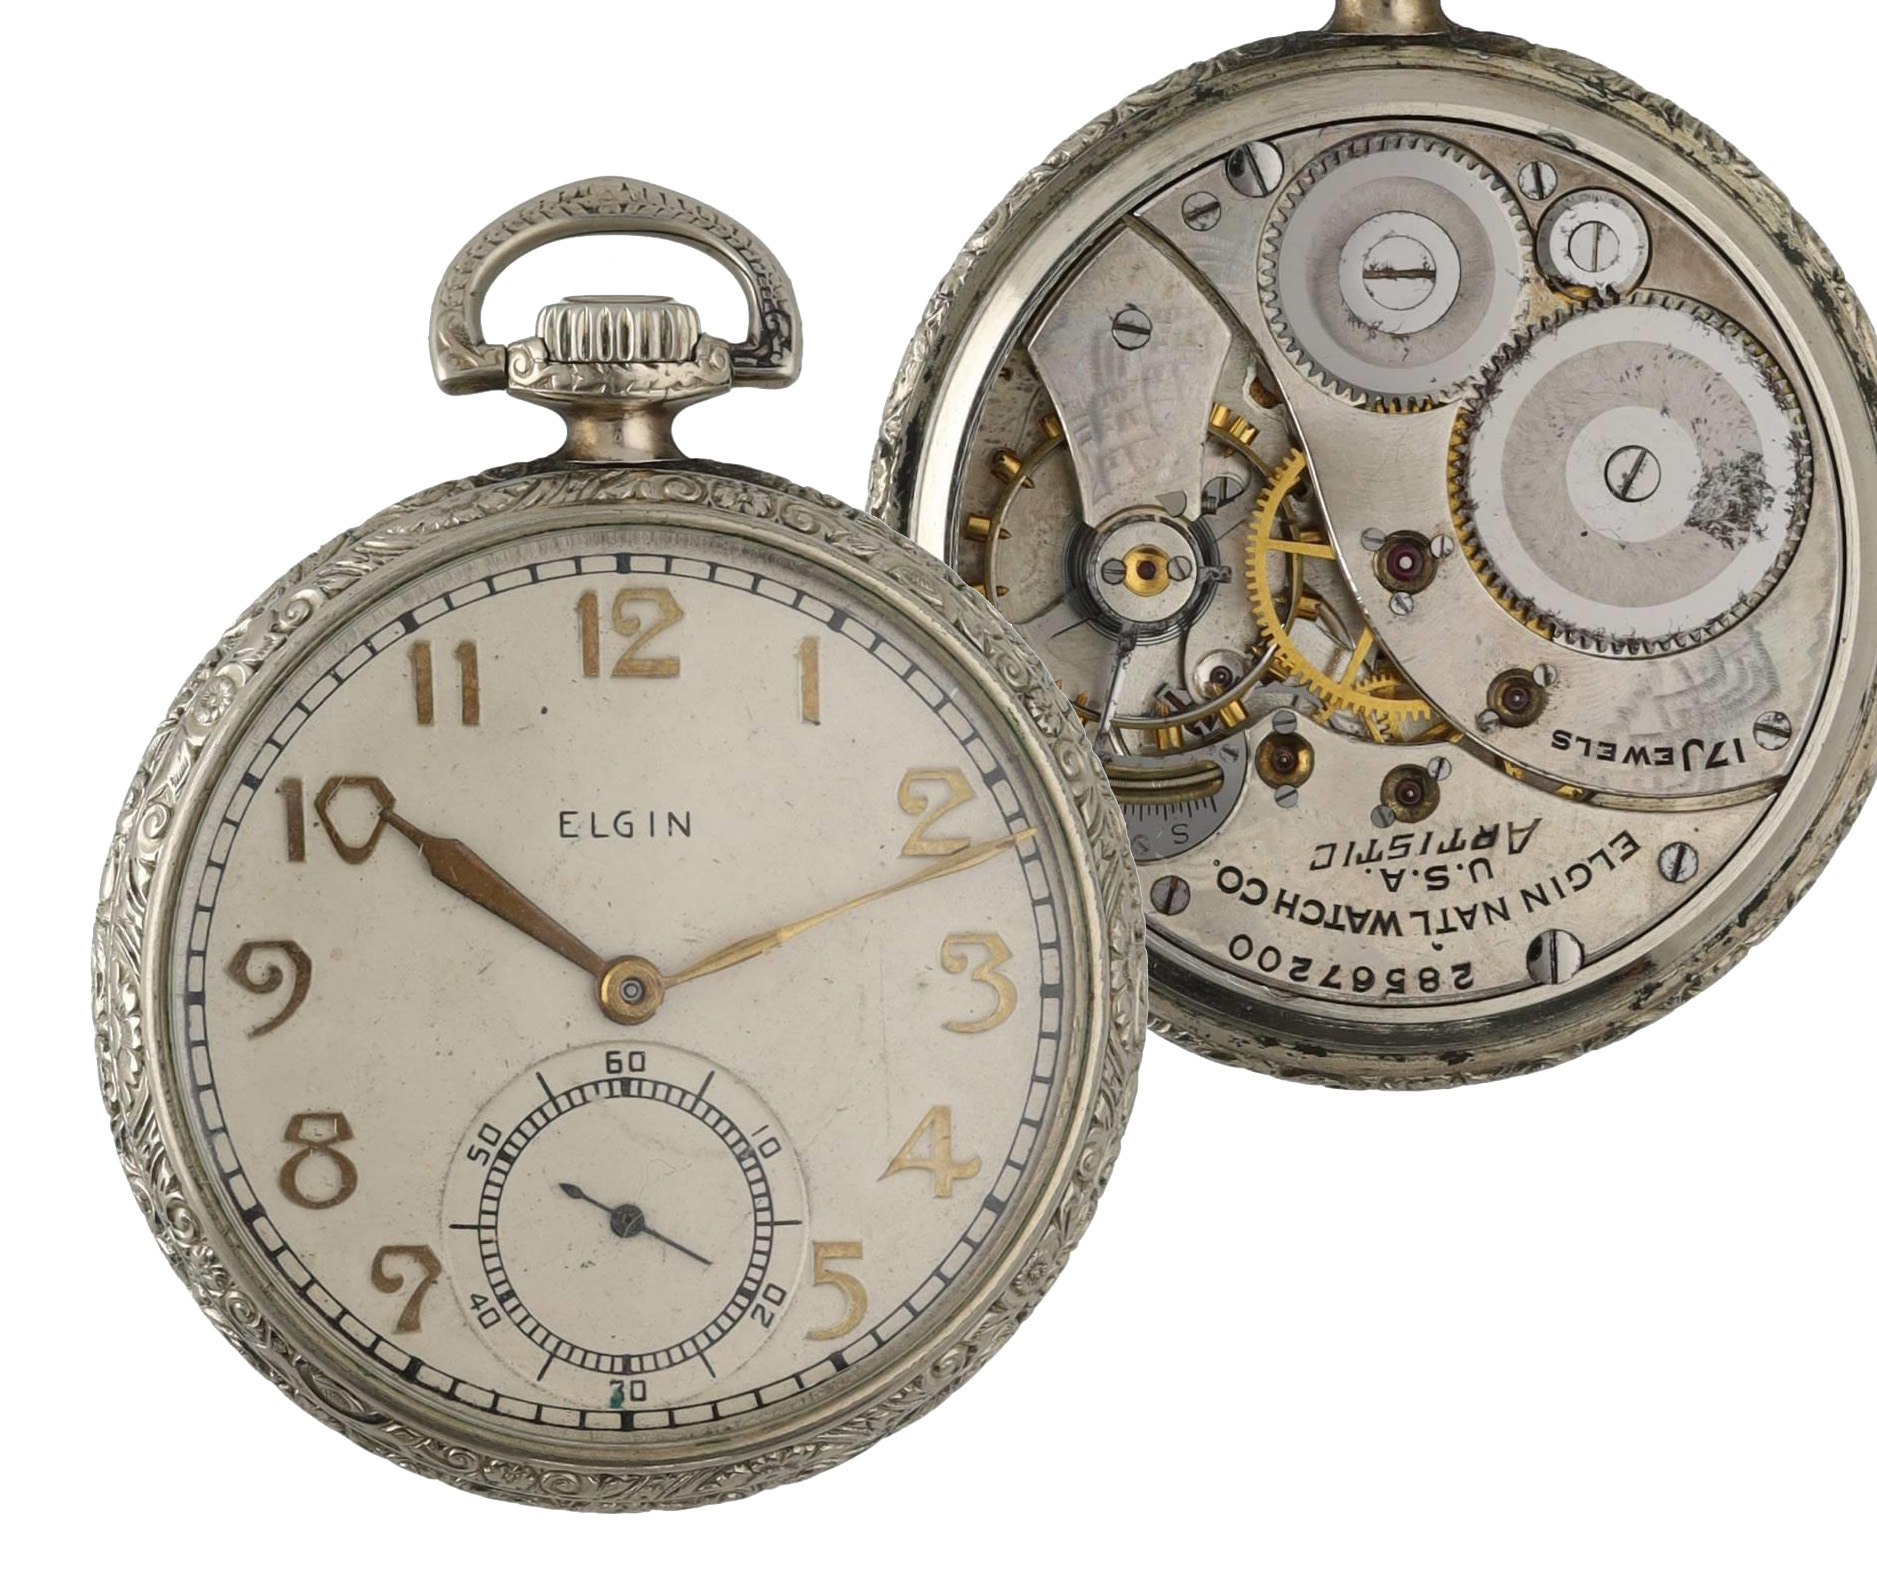 Elgin National Watch Co. 'Artistic' lever pocket watch, circa 1925, serial no. 28567200, signed 17